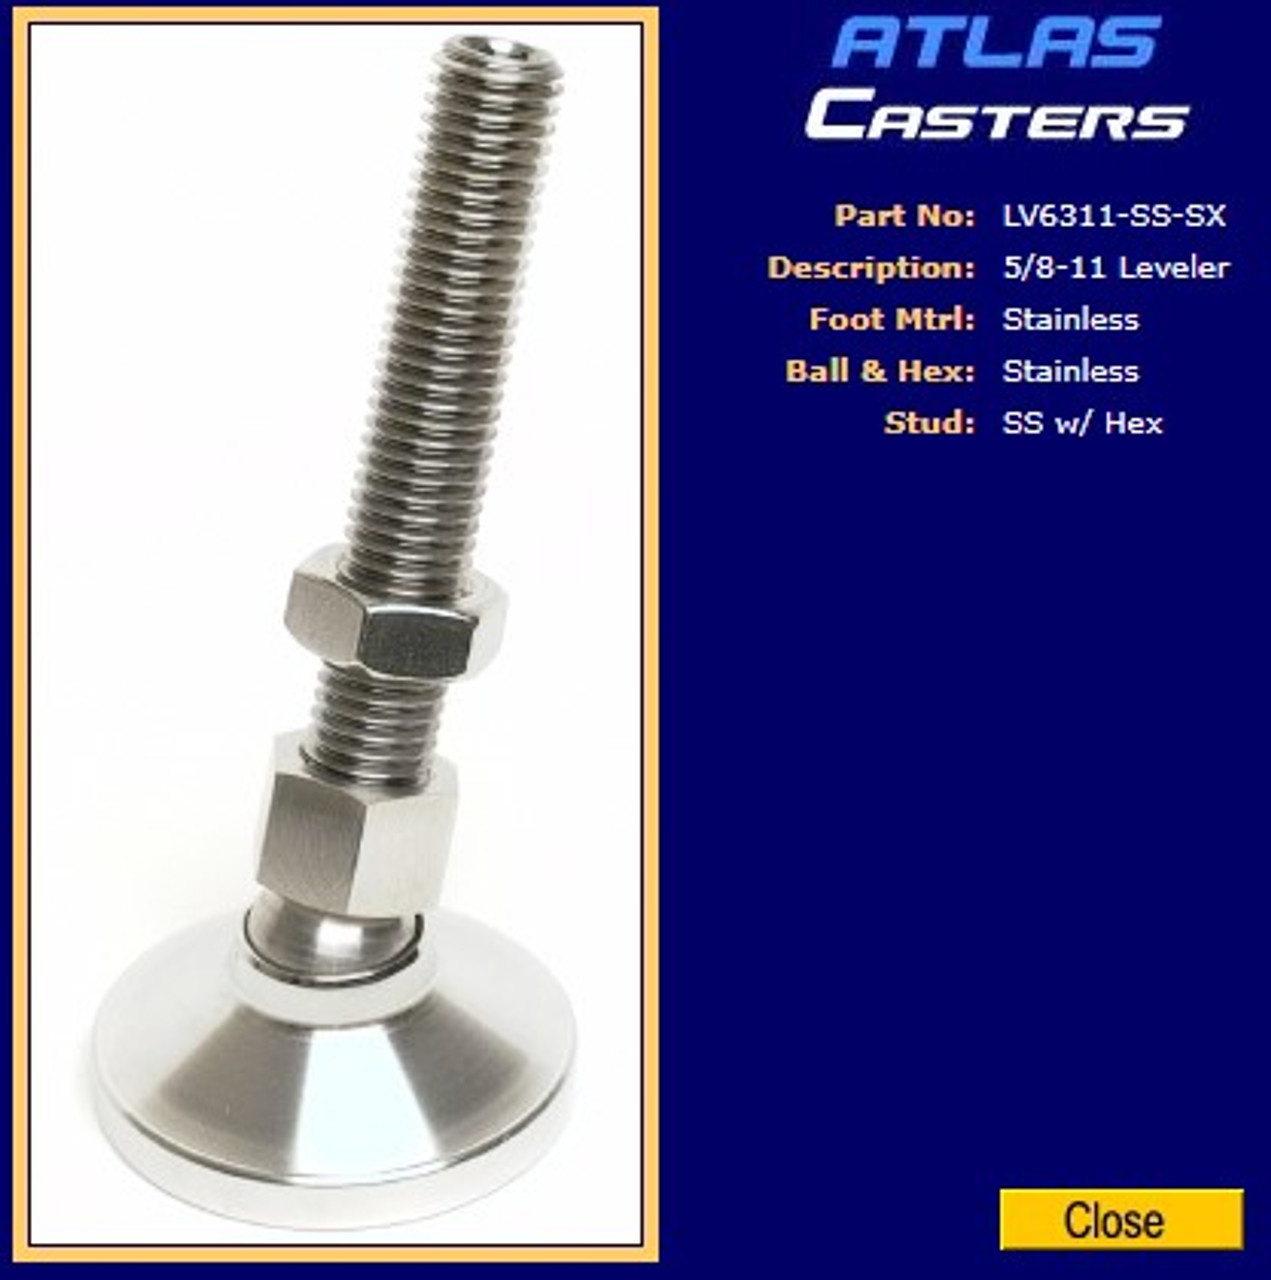 LV6311-SS-SX Stainless Steel Leveler with 5/8-11 x 3.5" hex stem